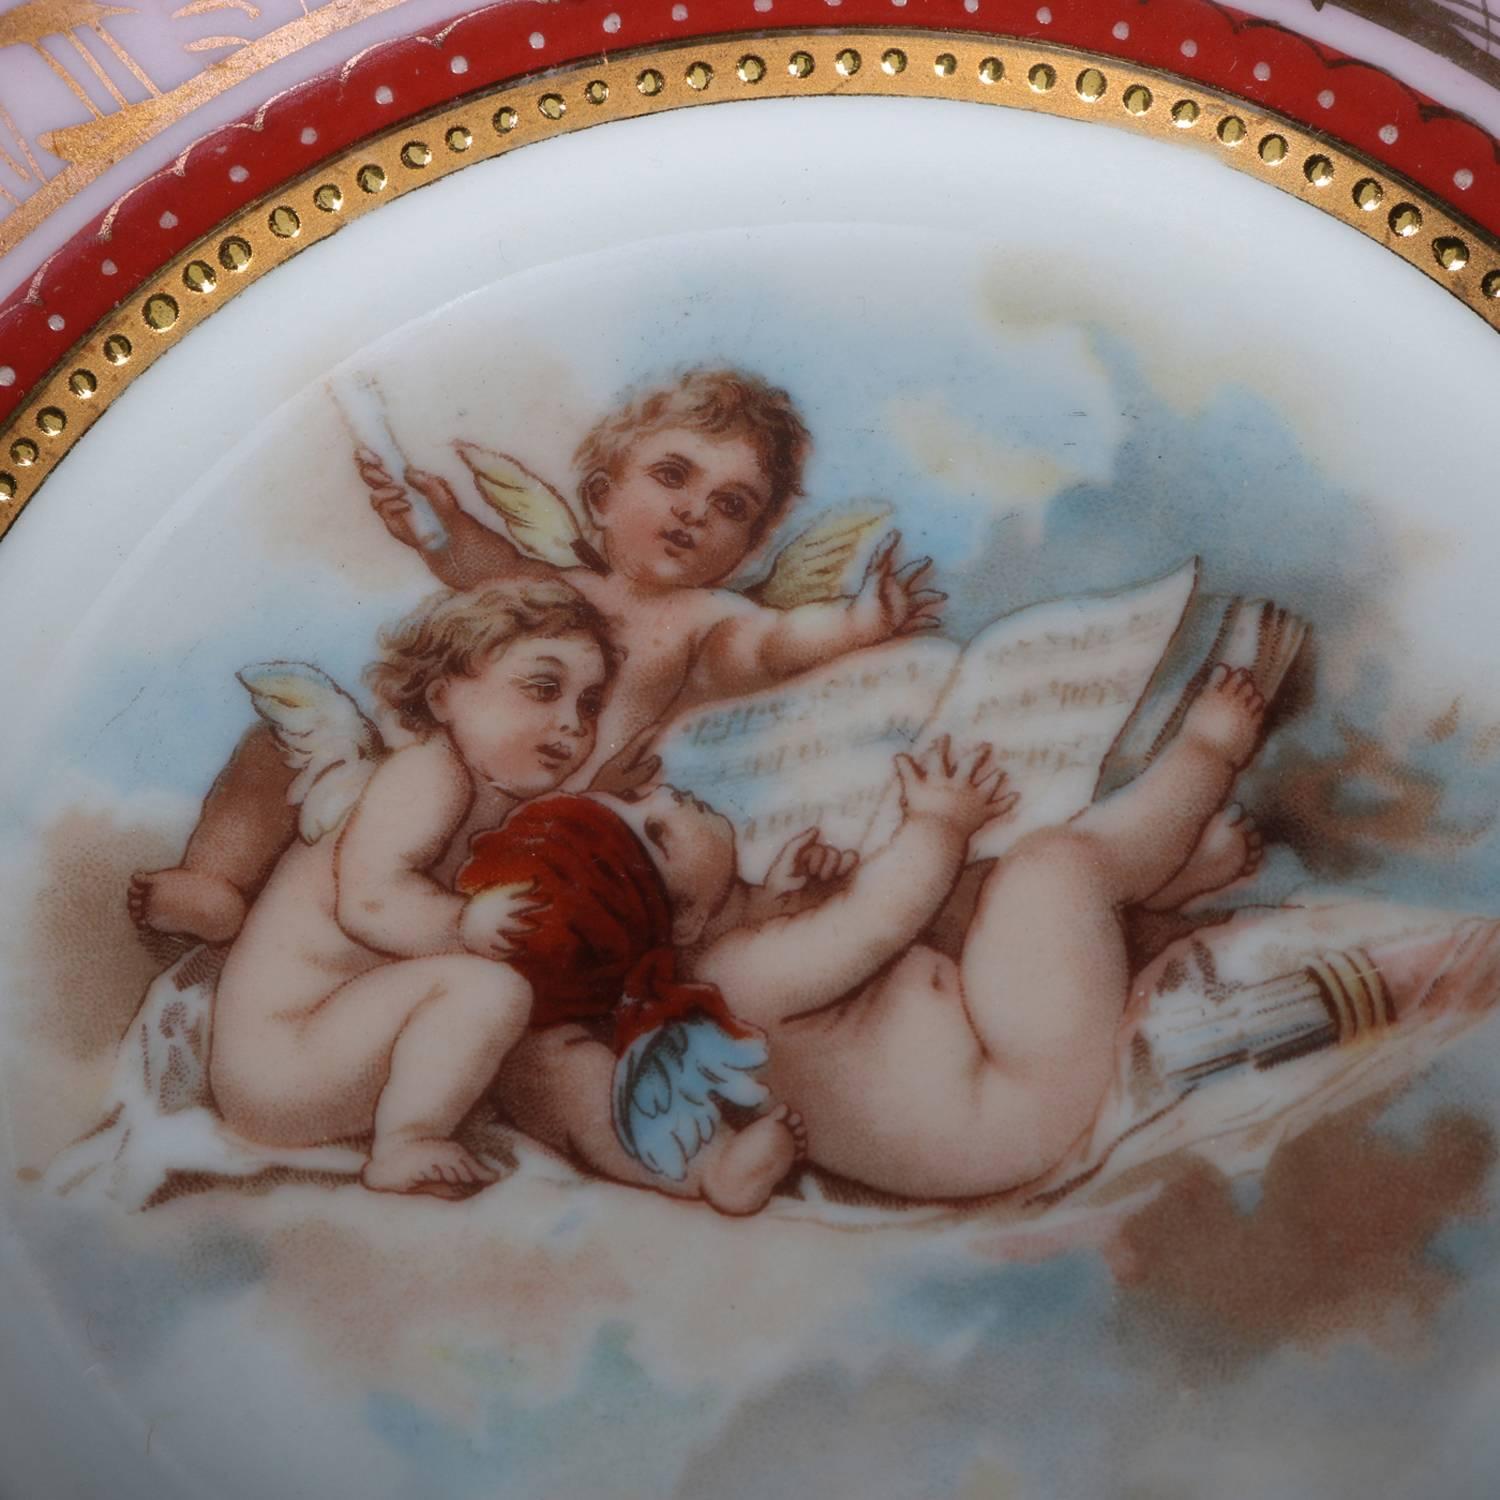 Four antique hand-painted plates by Royal Vienna feature central Classical cherub scenes, borders with reserves of marsh scenes with herons and grasses including cattails, en verso blue shield or beehive mark, circa 1880

Measure: 1